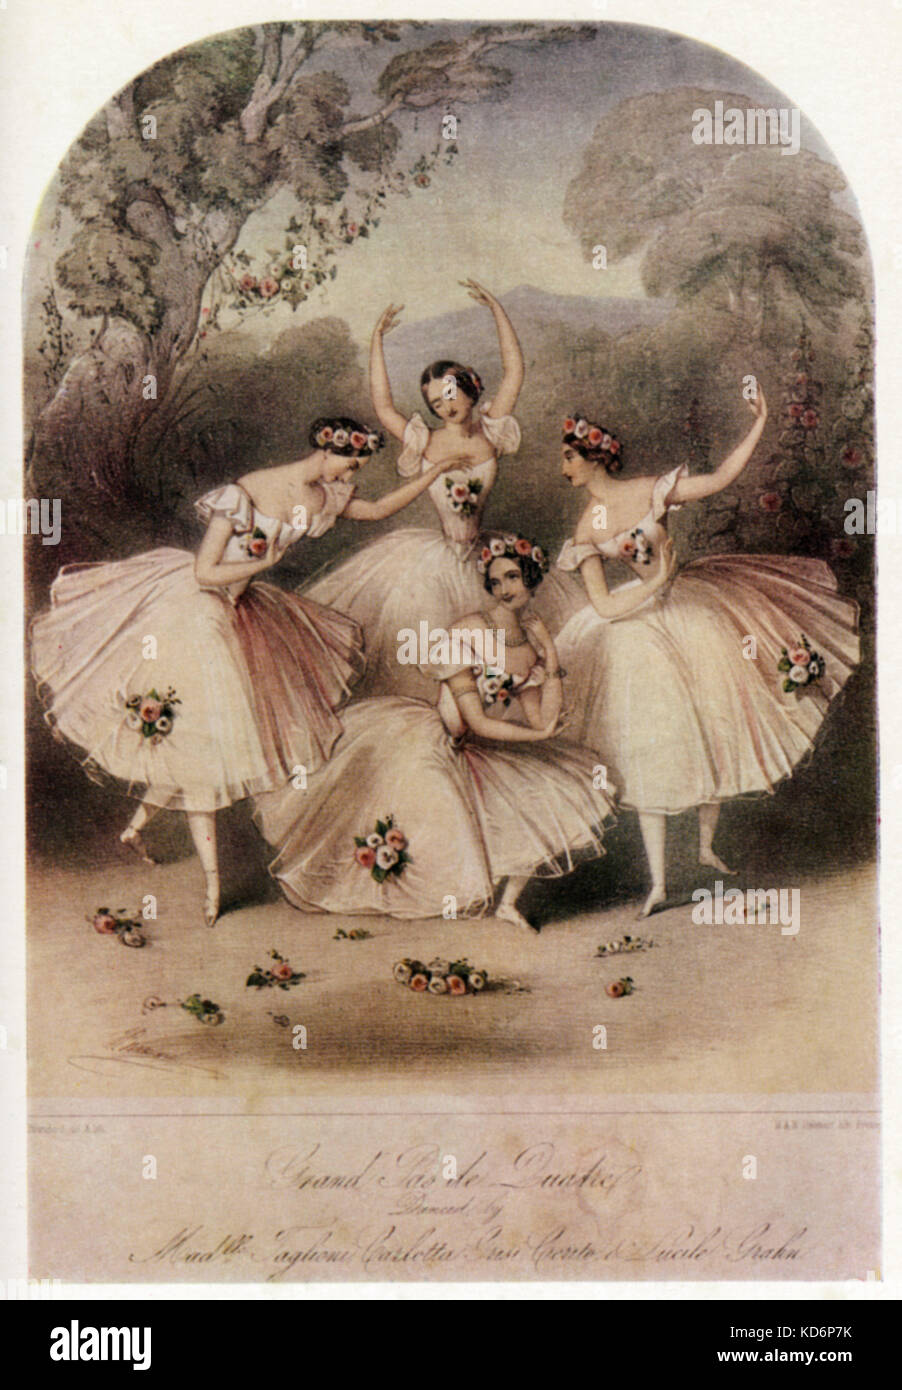 Grand Pas de Quatre - illustration of a scene from the Romantic ballet with Marie Taglioni, Carlotta Grisi, Fanny Cerrito, and Lucile Grahn dancing. Choreographed by Jules Perrot in 1845, with music by Cesare Pugni, at Her Majesty's Theatre, London. Stock Photo